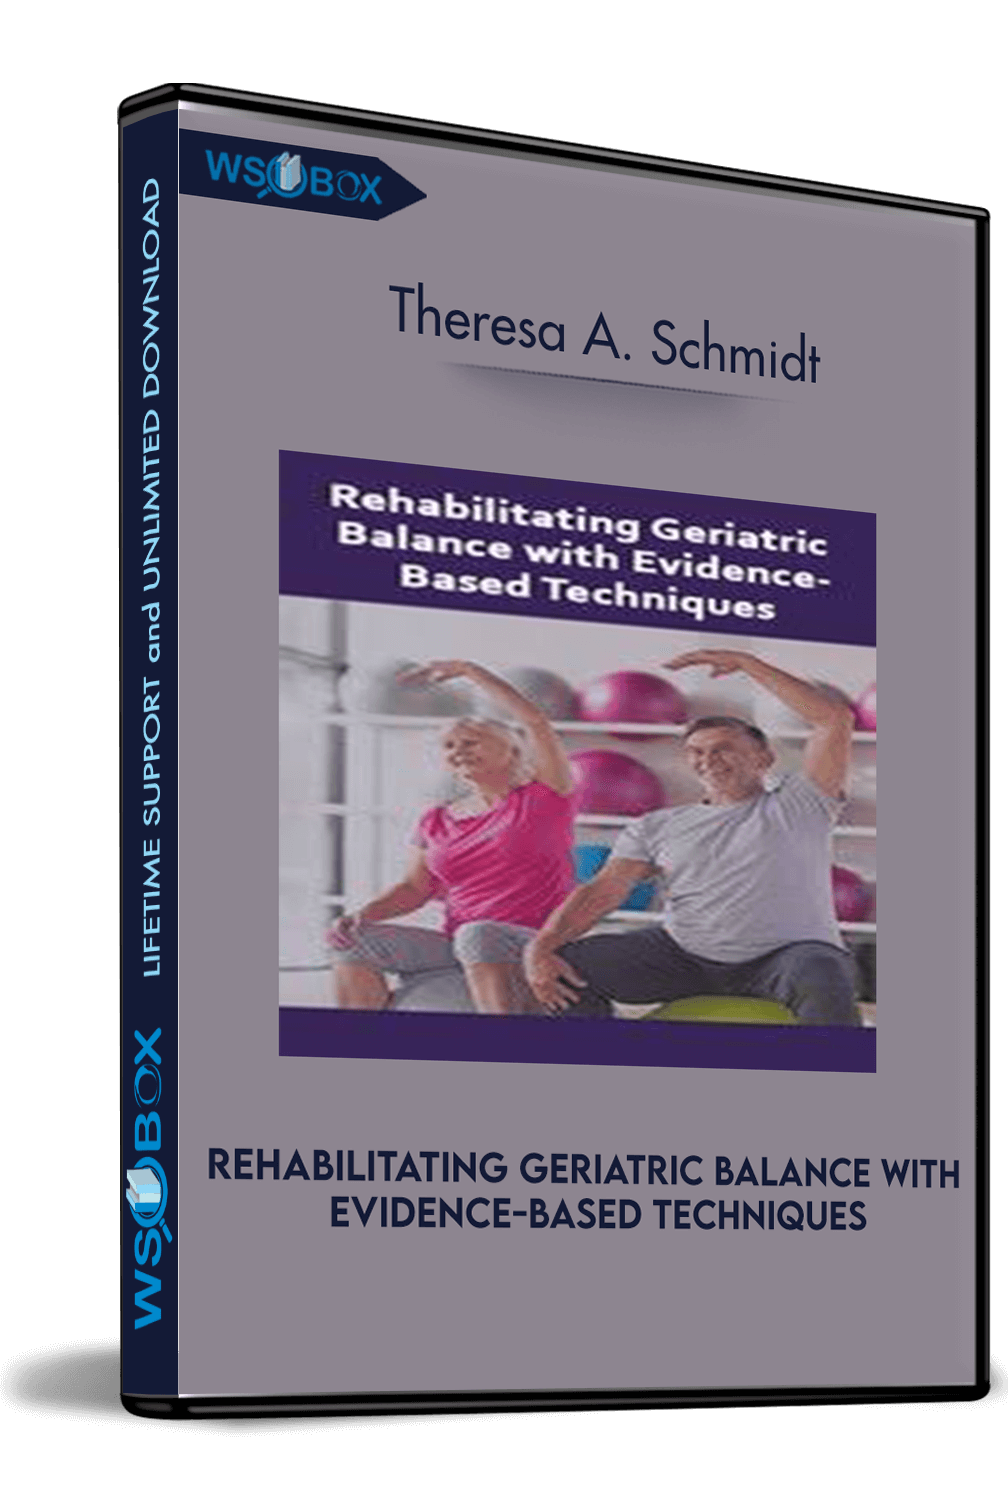 rehabilitating-geriatric-balance-with-evidence-based-techniques-theresa-a-schmidt